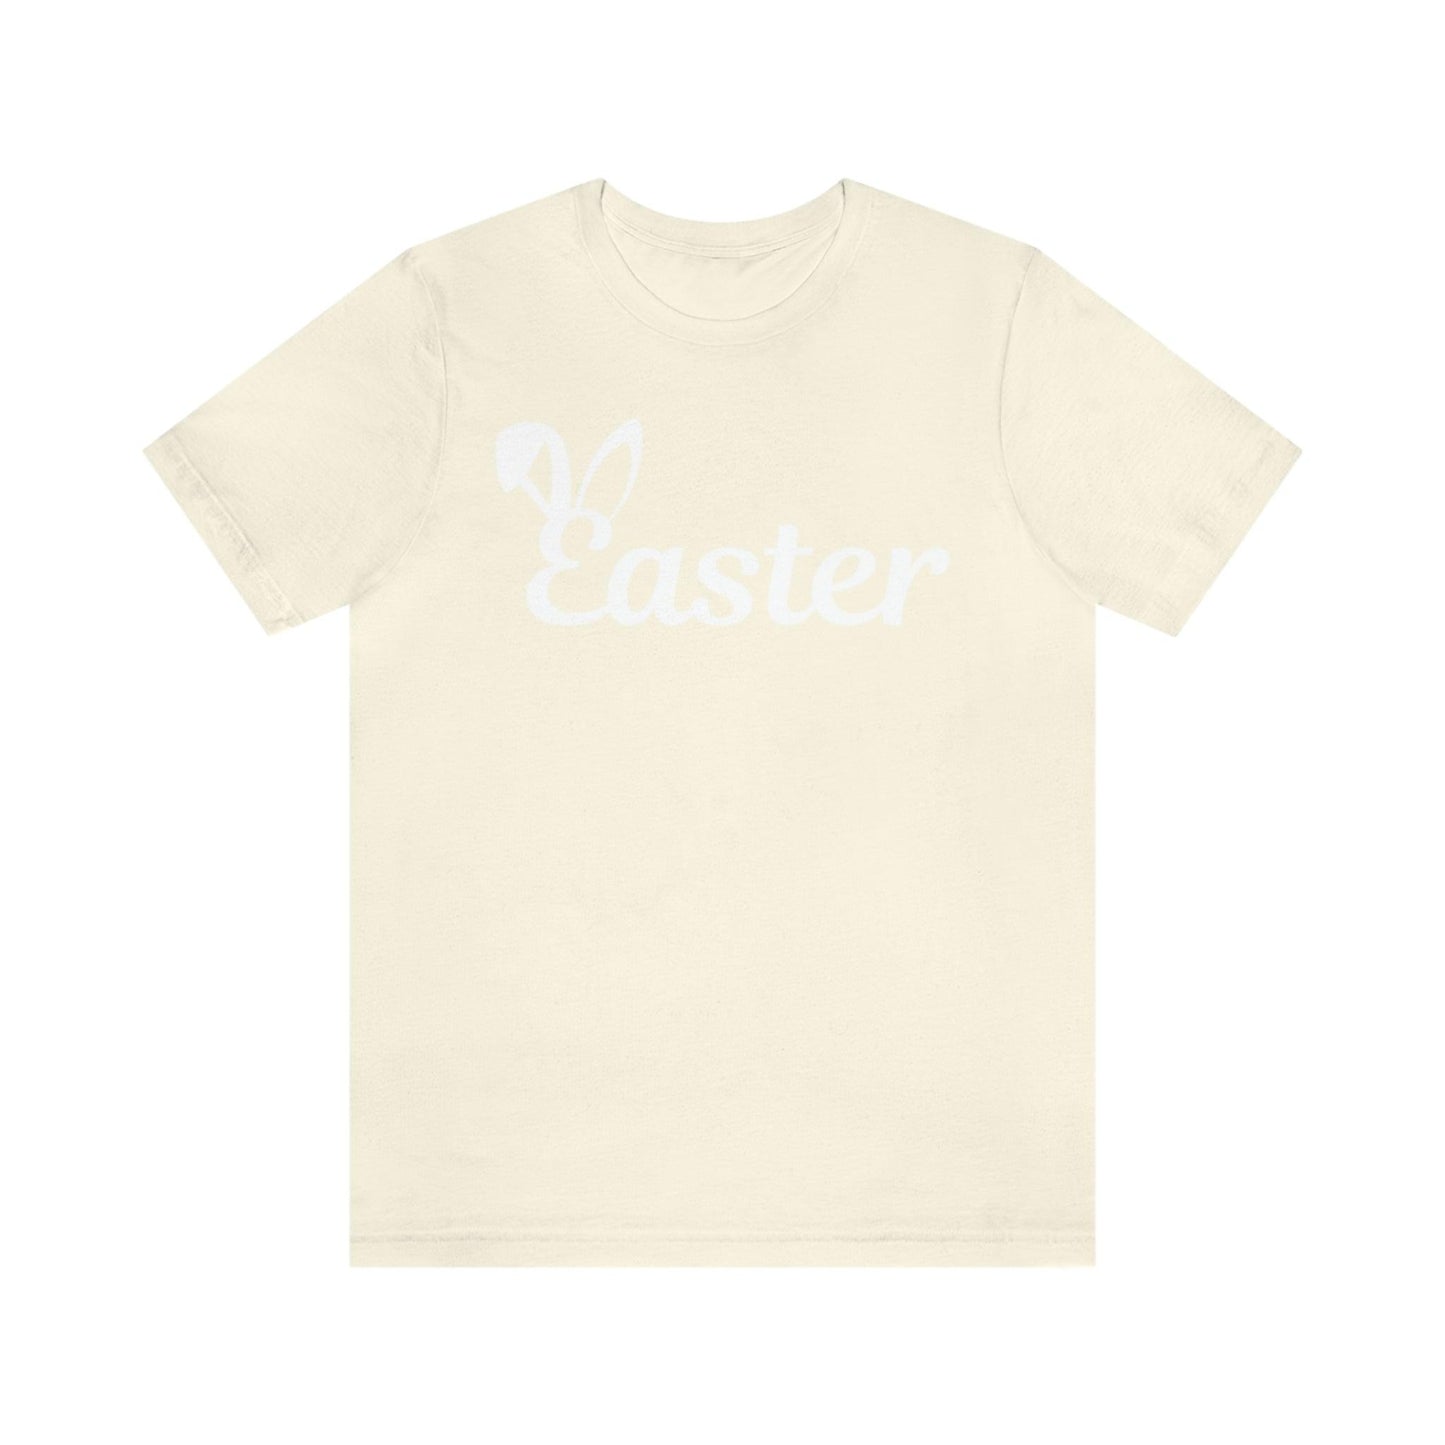 Easter bunny shirt Easter outfit Happy easter shirt Easter tee - Easter egg hunt shirt easter bunny outfit bunny lover gift Easter tshirt